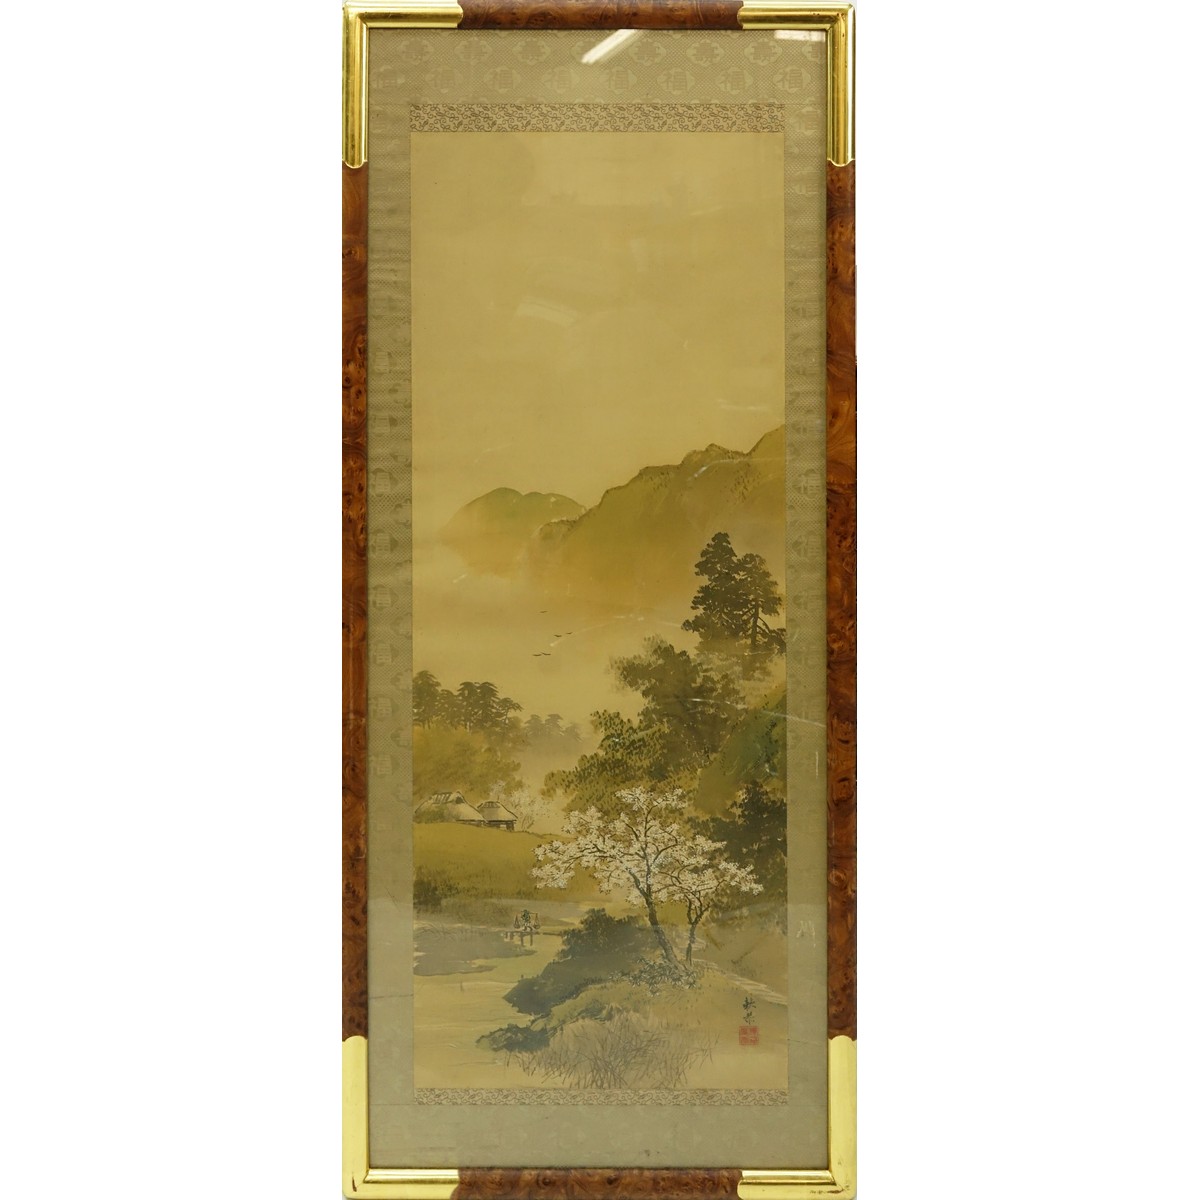 Early to mid 20th Century Japanese Watercolor on Paper Scroll Painting, Mountain Landscape with Cherry Blossoms. Signed, stamped lower right.